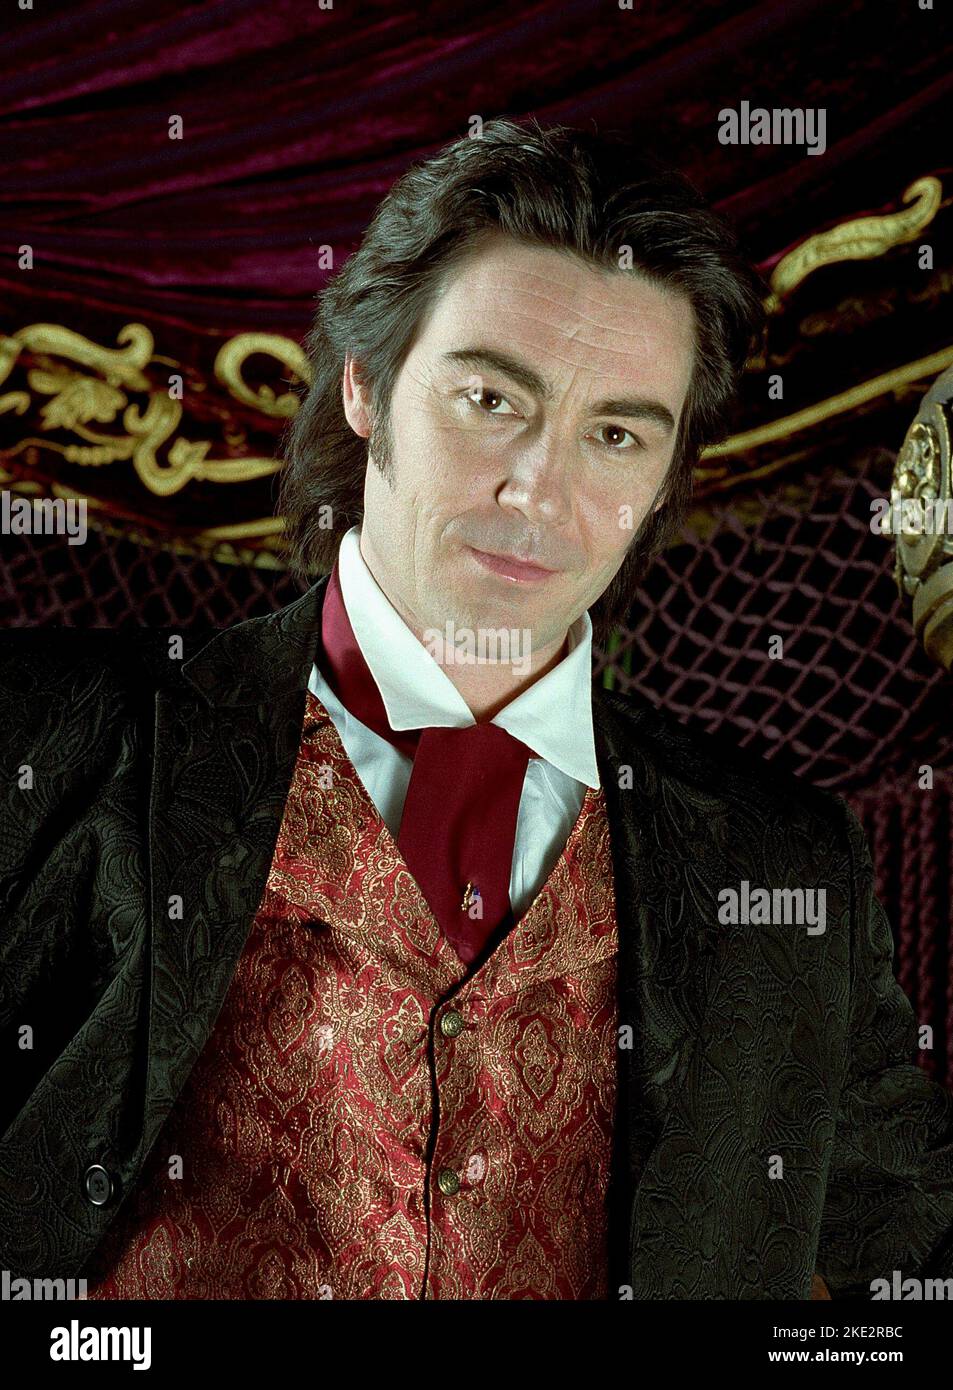 THE HAUNTED MANSION, NATHANIEL PARKER, 2003 Stock Photo